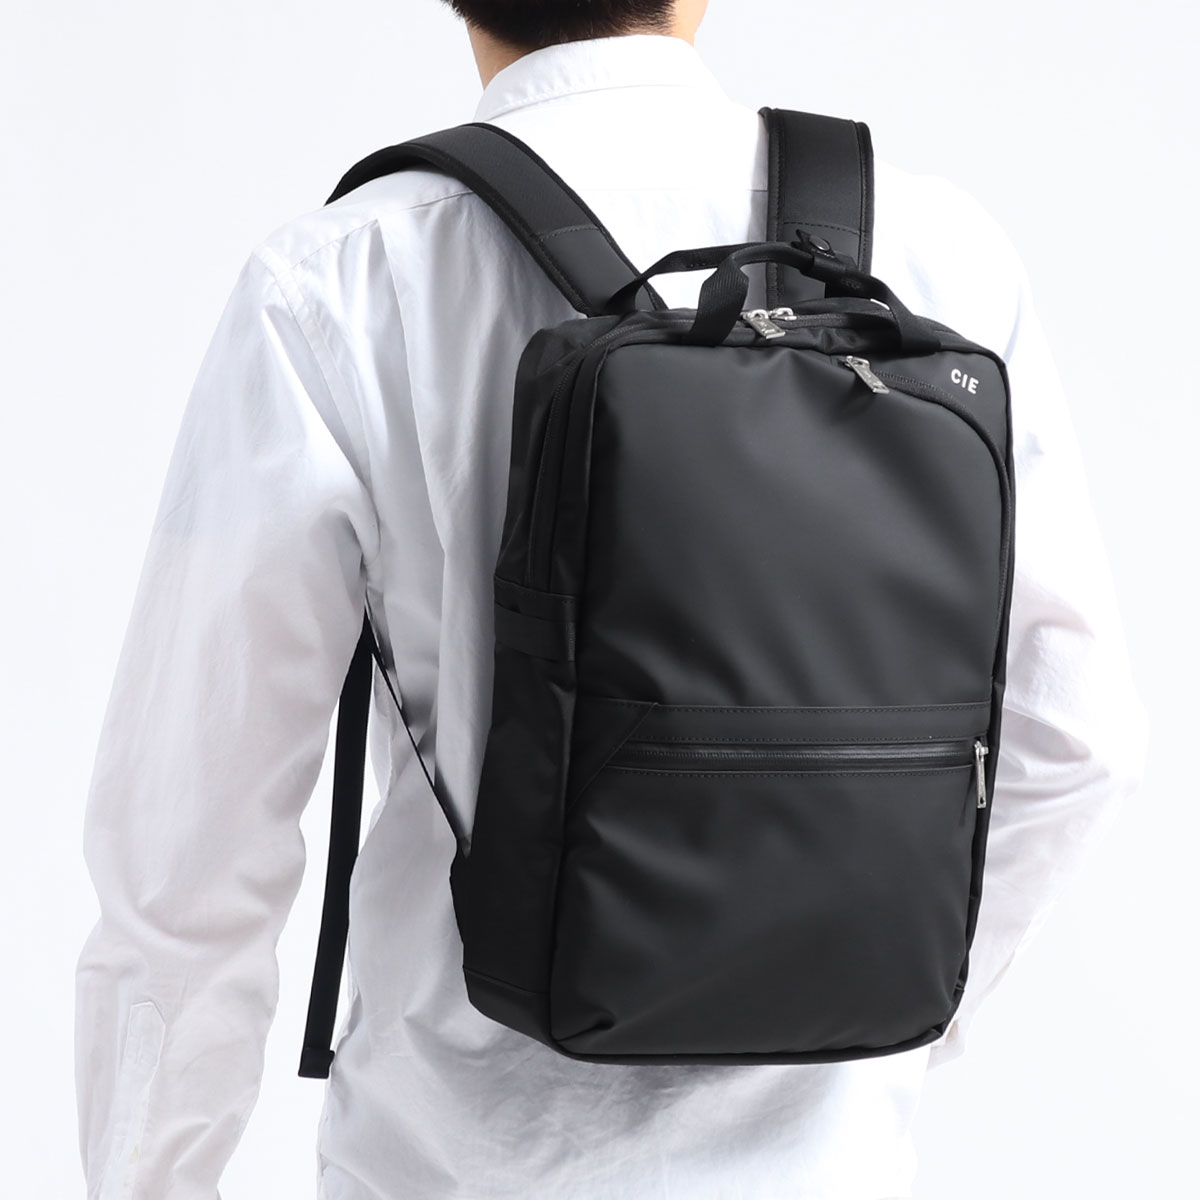 CIE シー VARIOUS 2WAYBACKPACK S バックパック 021807｜【正規販売店 